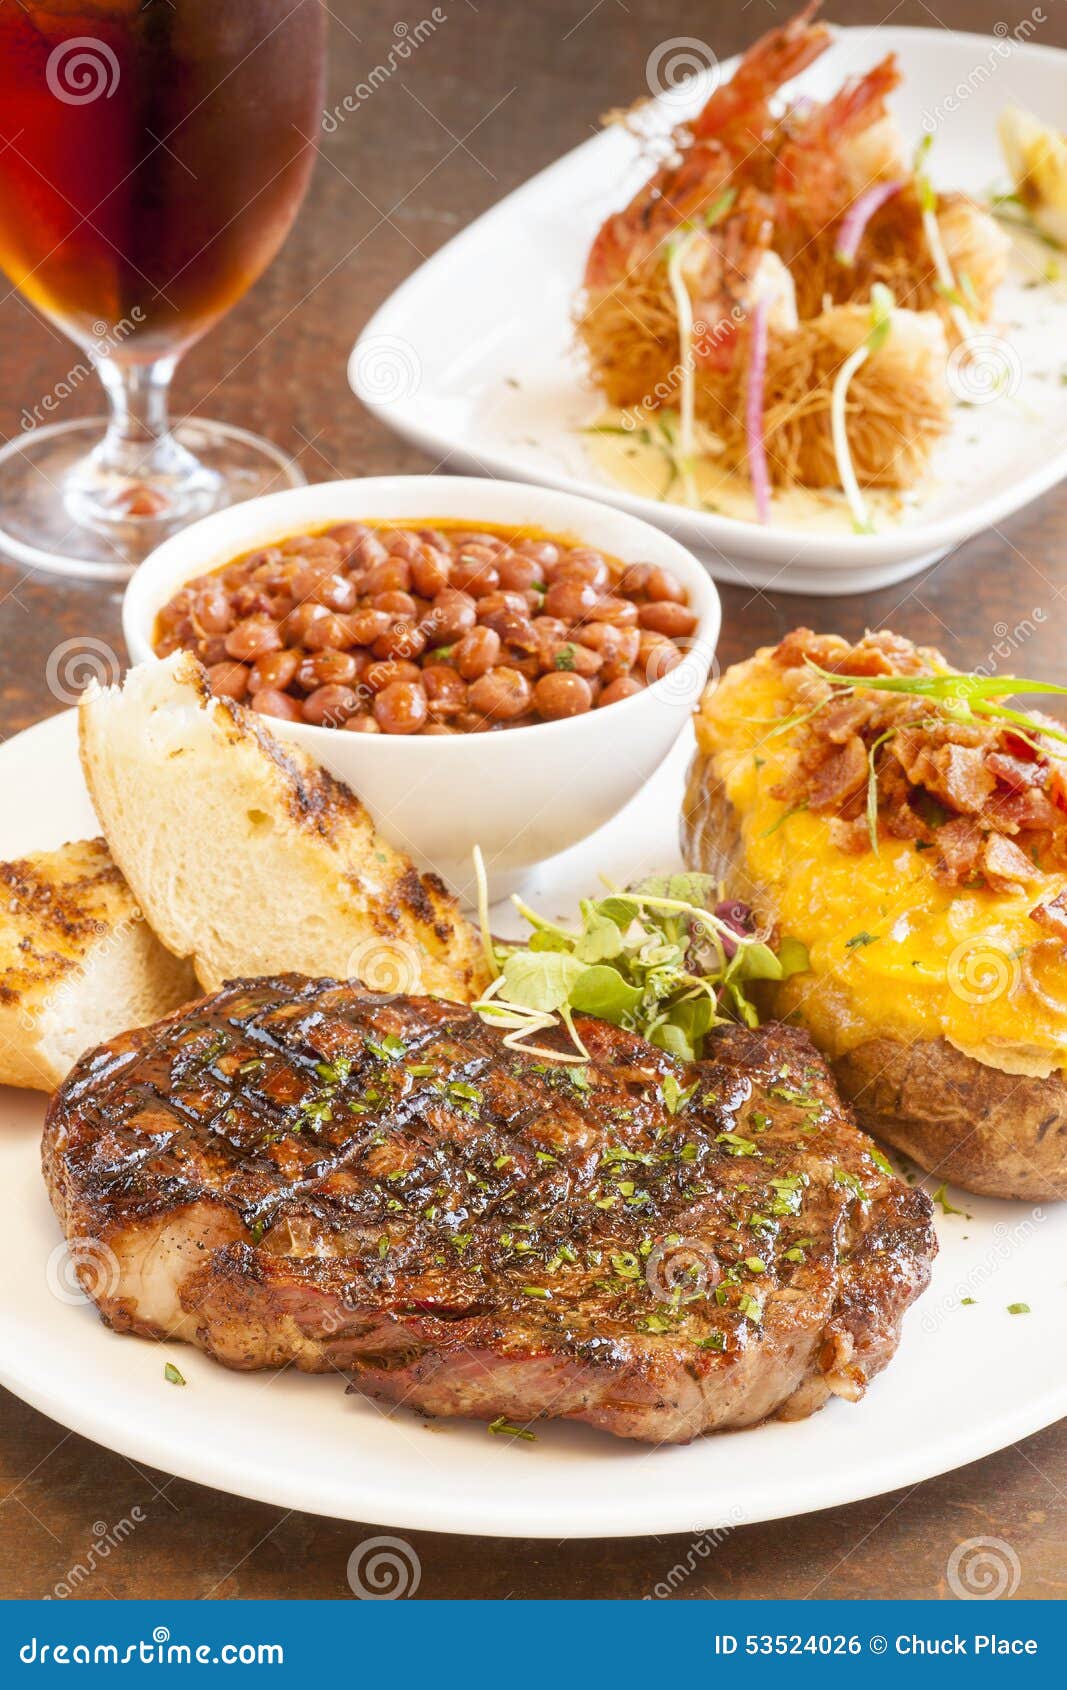 Steak with Baked Potato, Beans and Garlic Bread Stock Photo - Image of ...